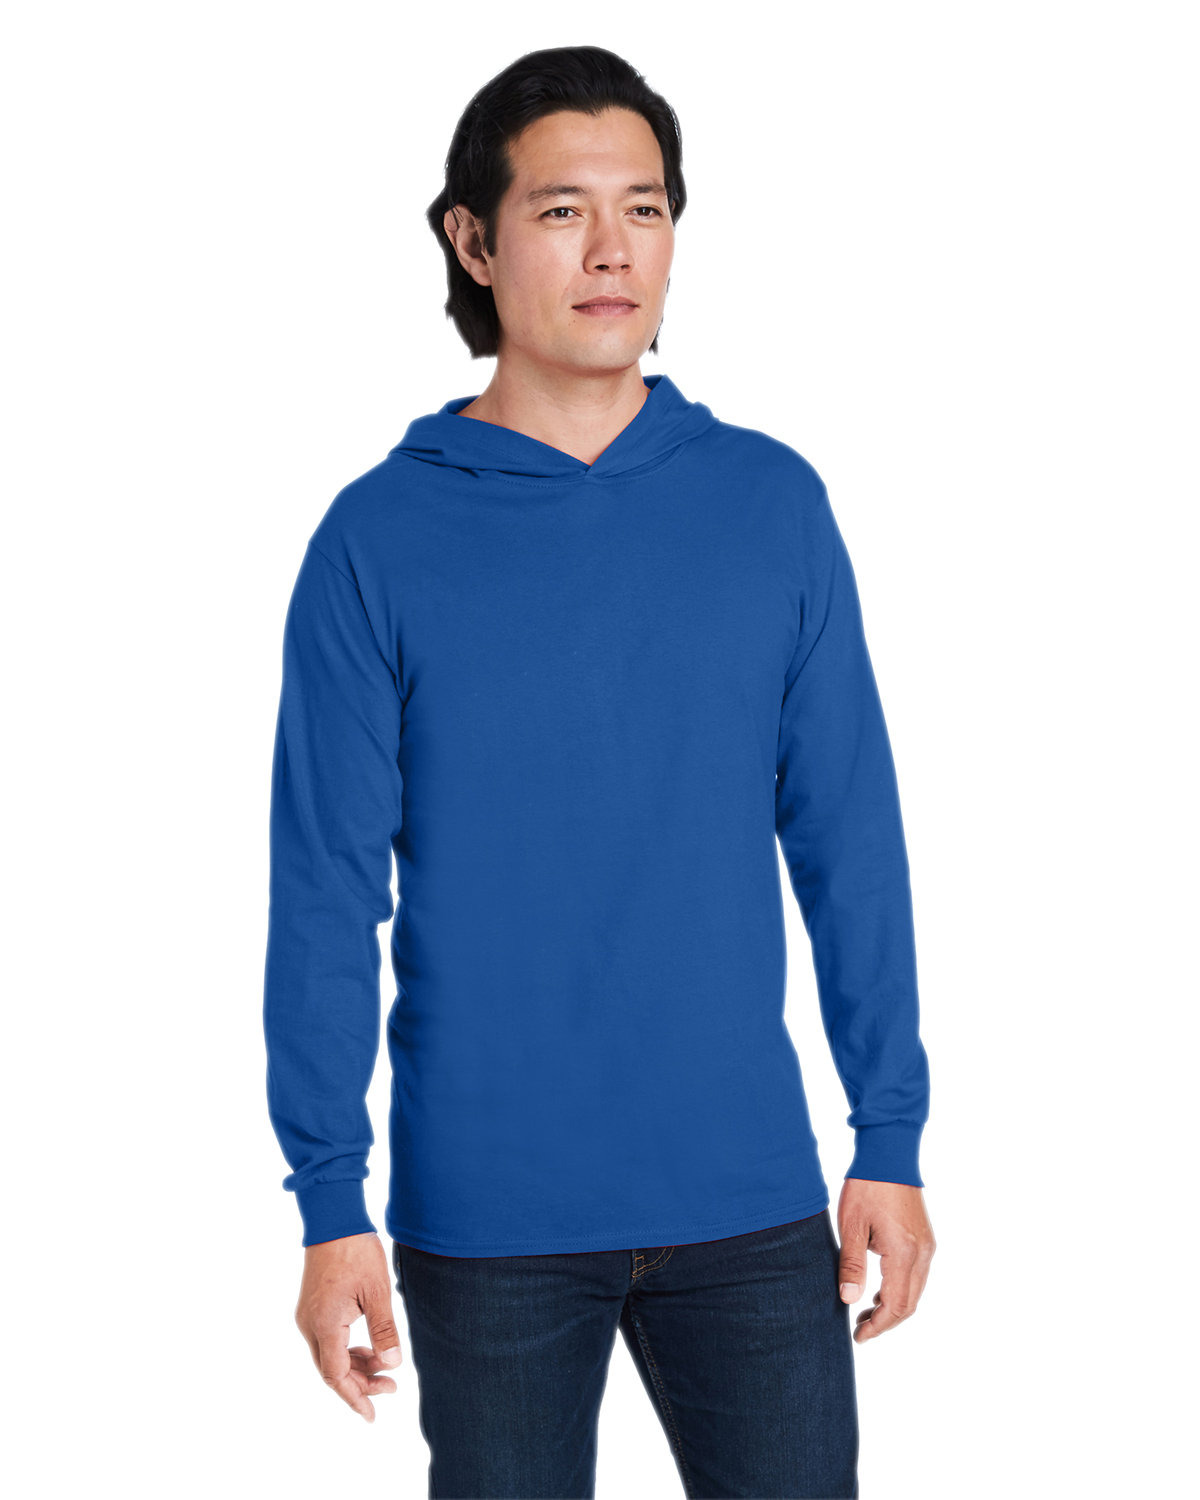 Fruit of the Loom Men's HD Cotton™ Jersey Hooded T-Shirt ROYAL 